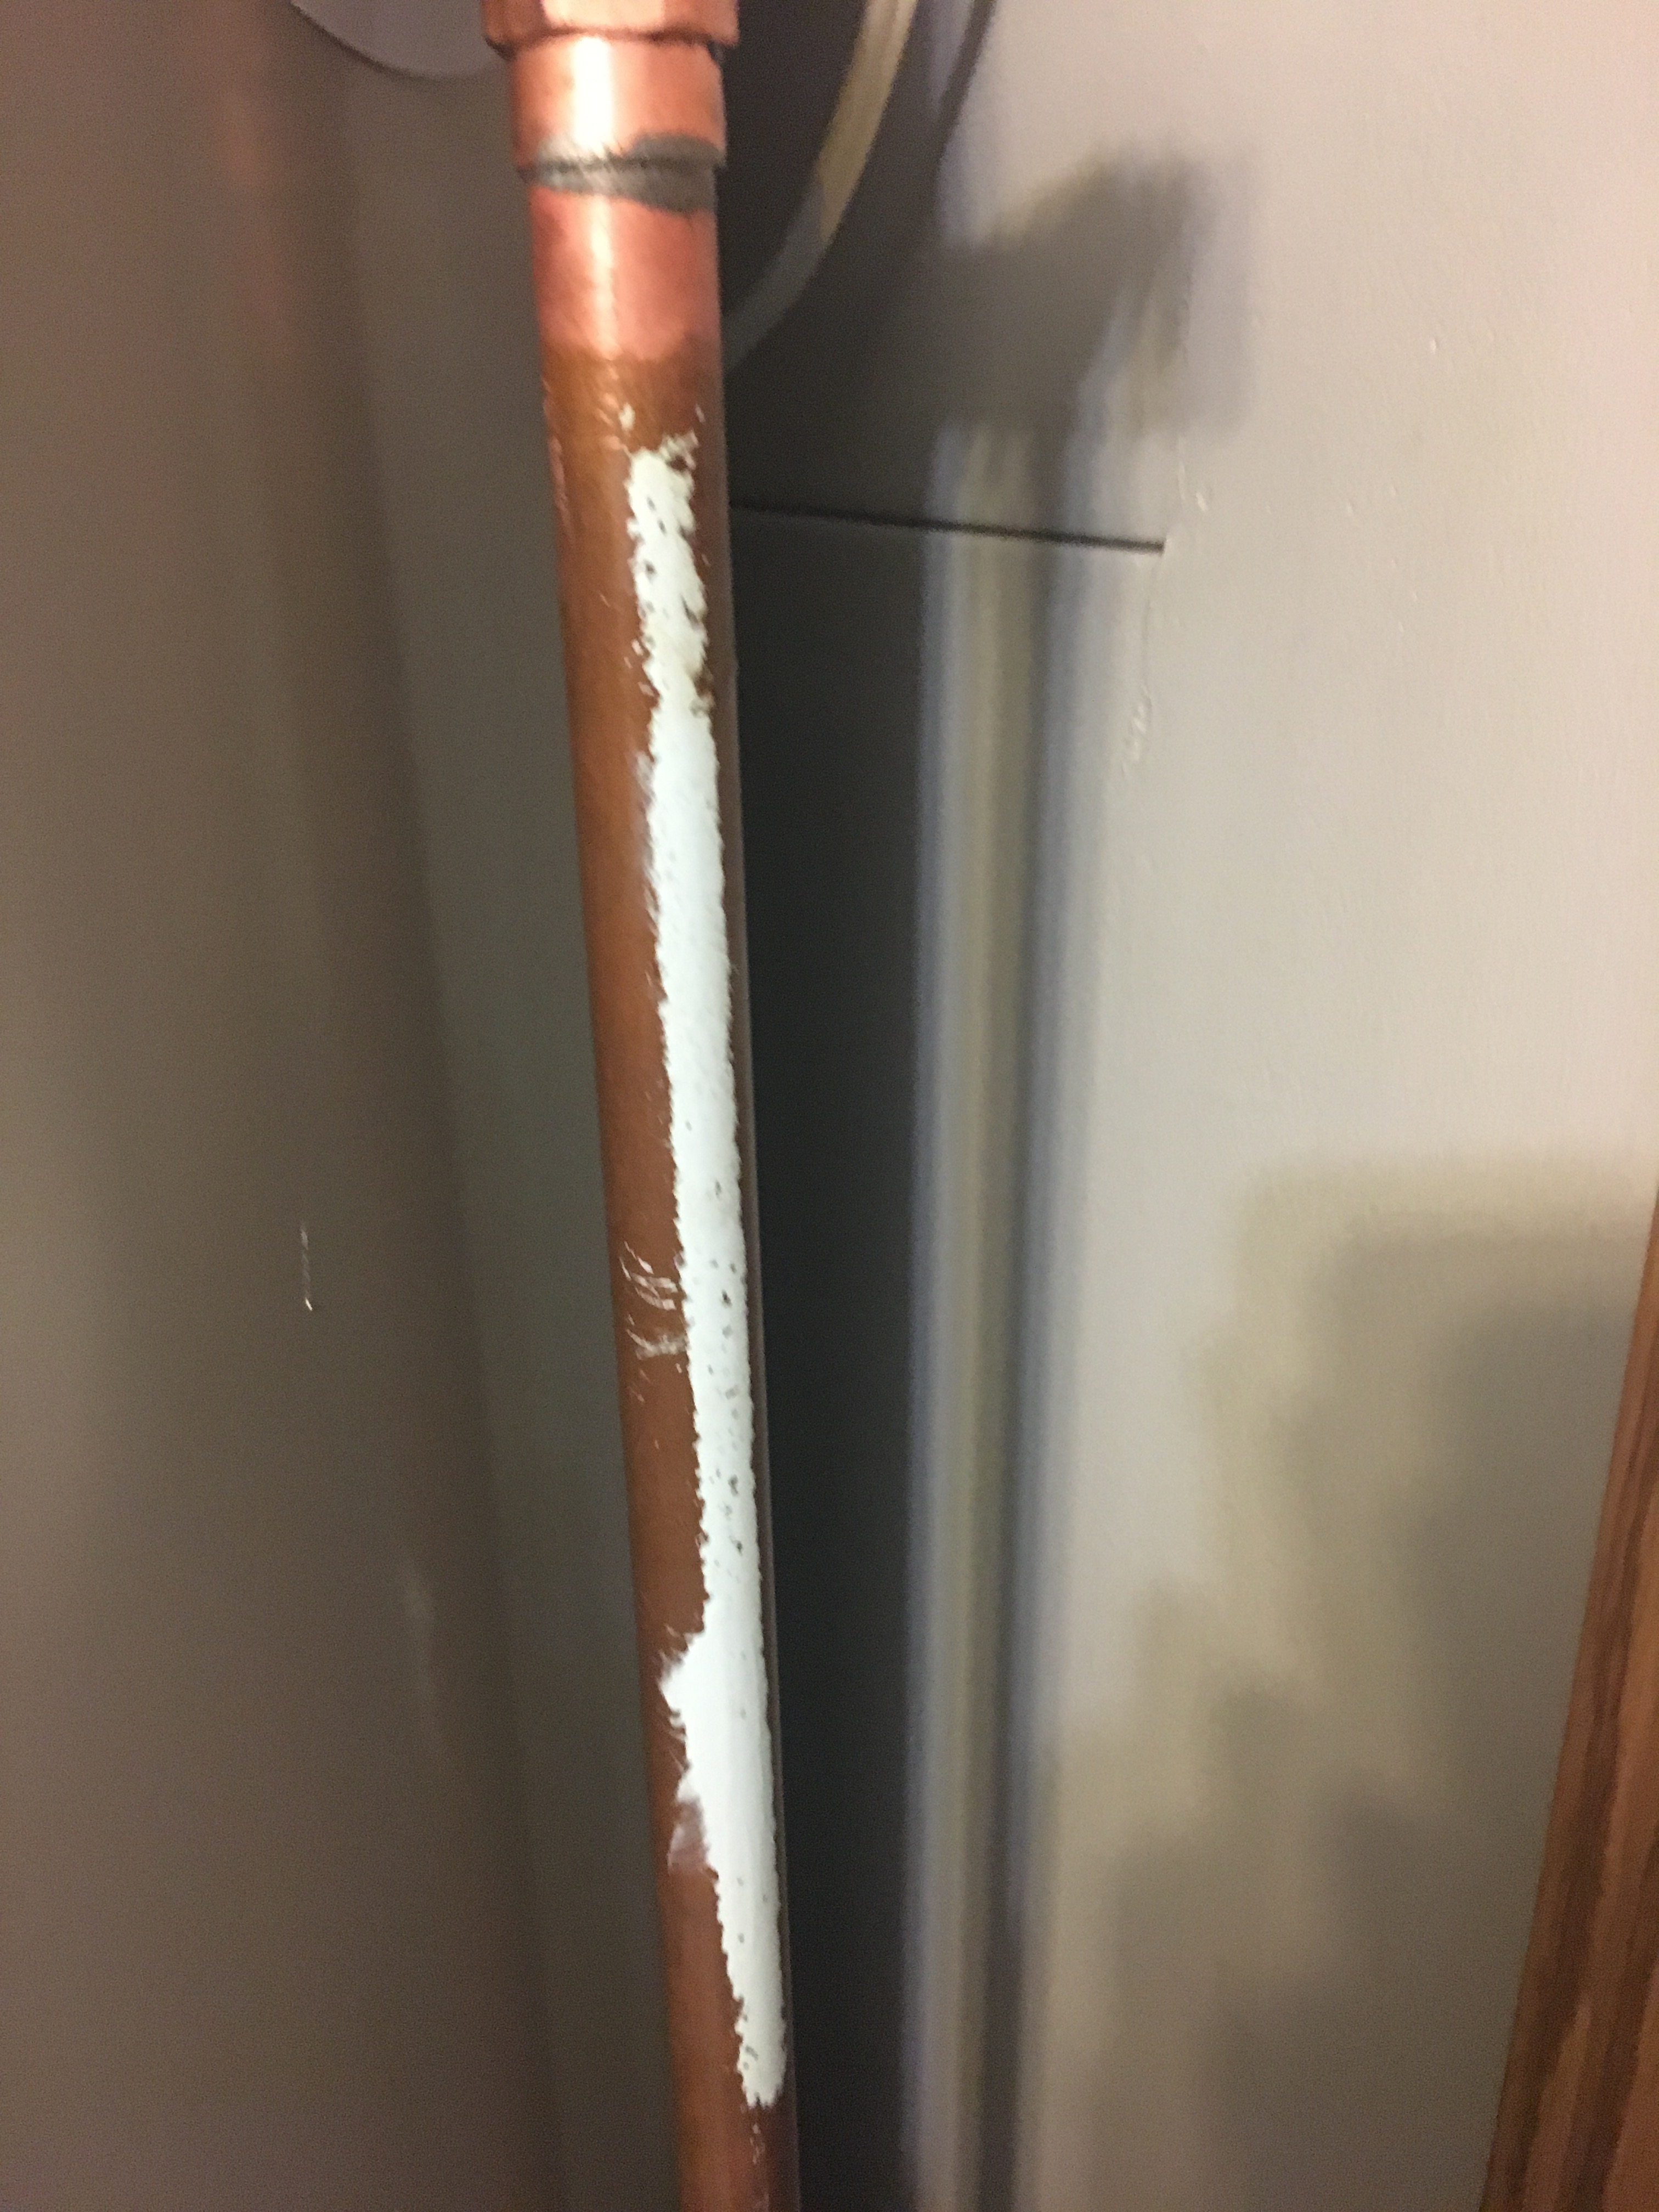 Can copper pipes be painted?